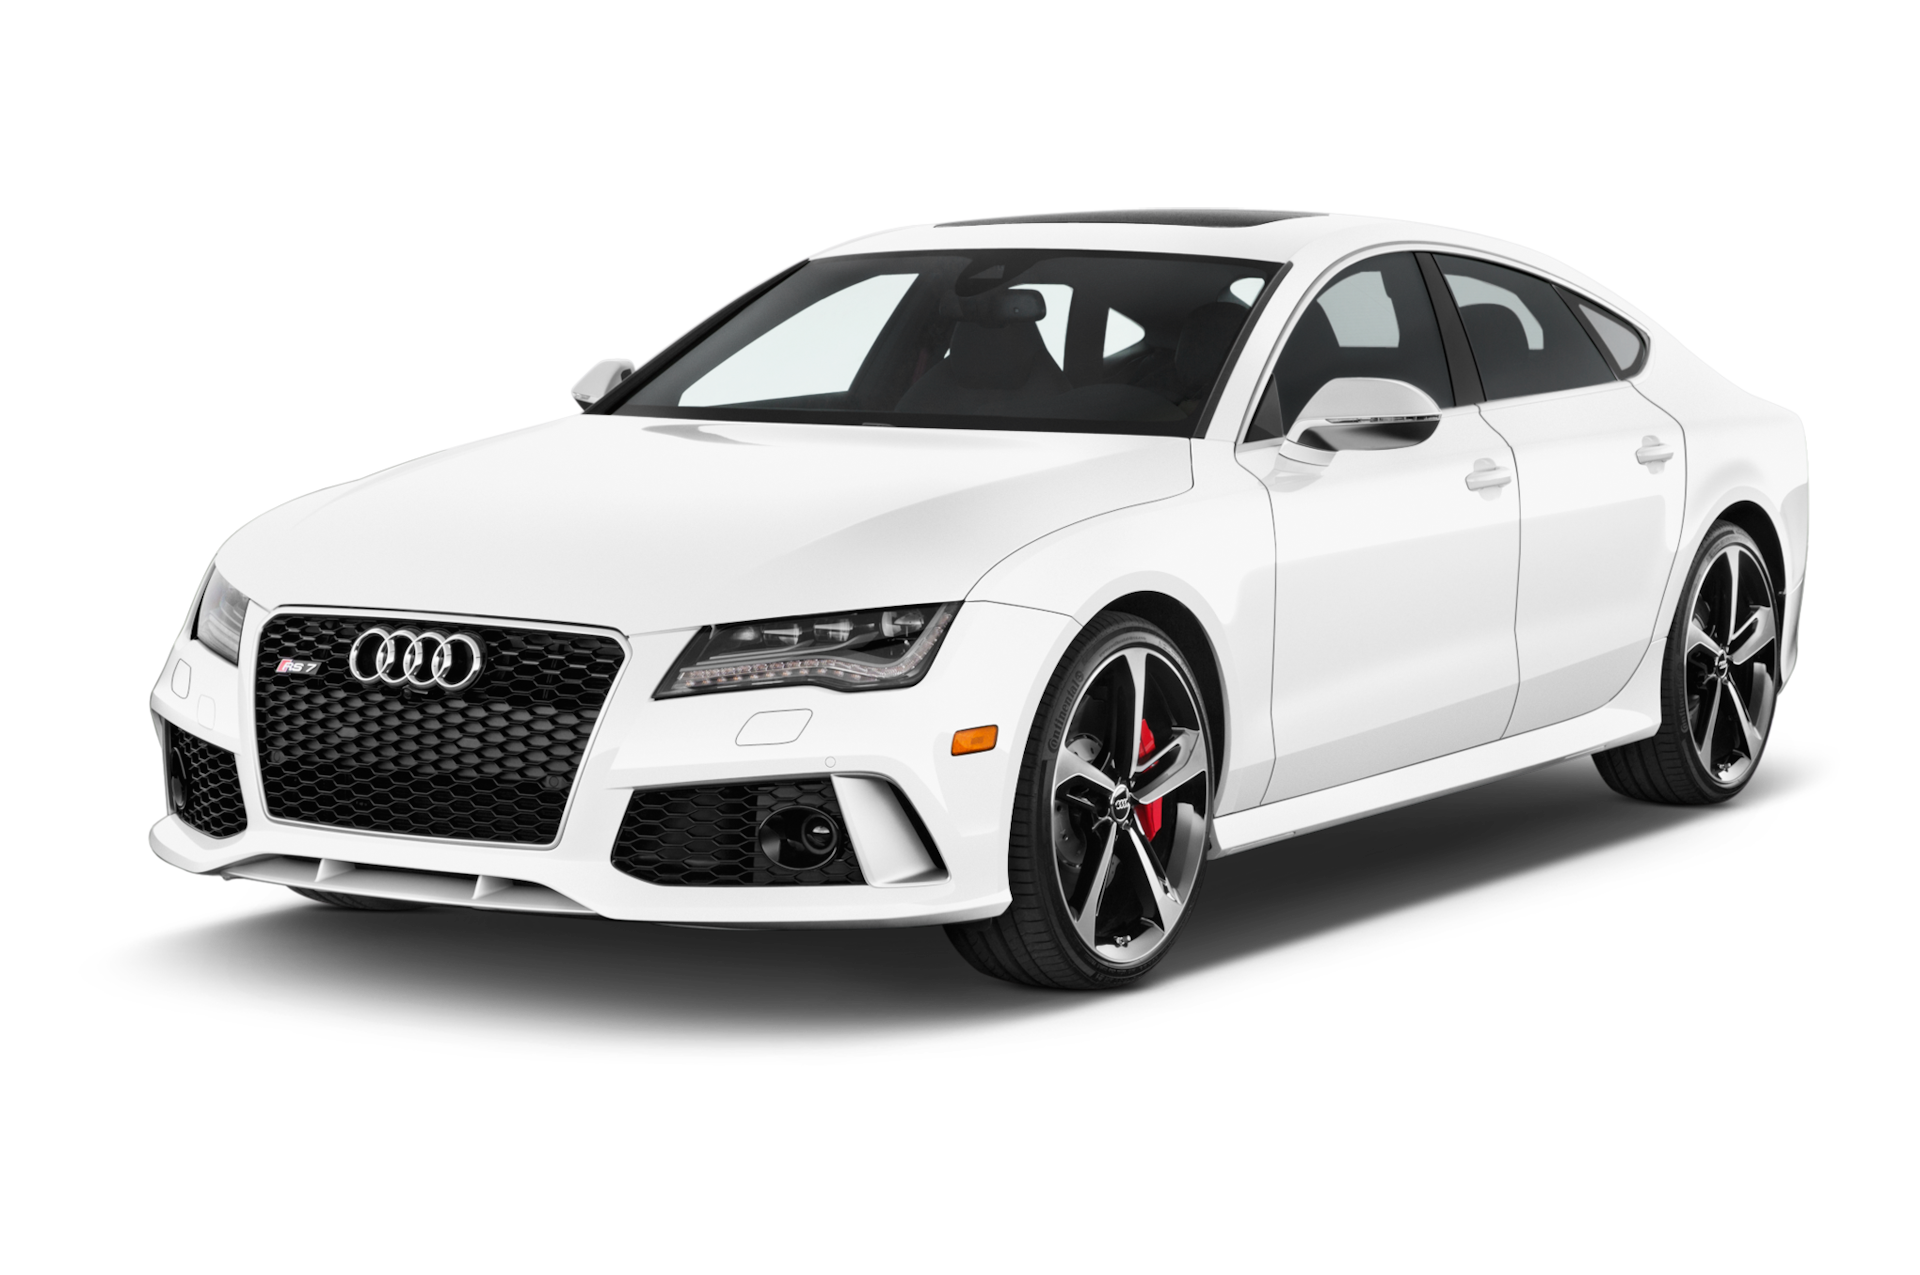 2015 Audi RS 7 Prices, Reviews, and Photos - MotorTrend